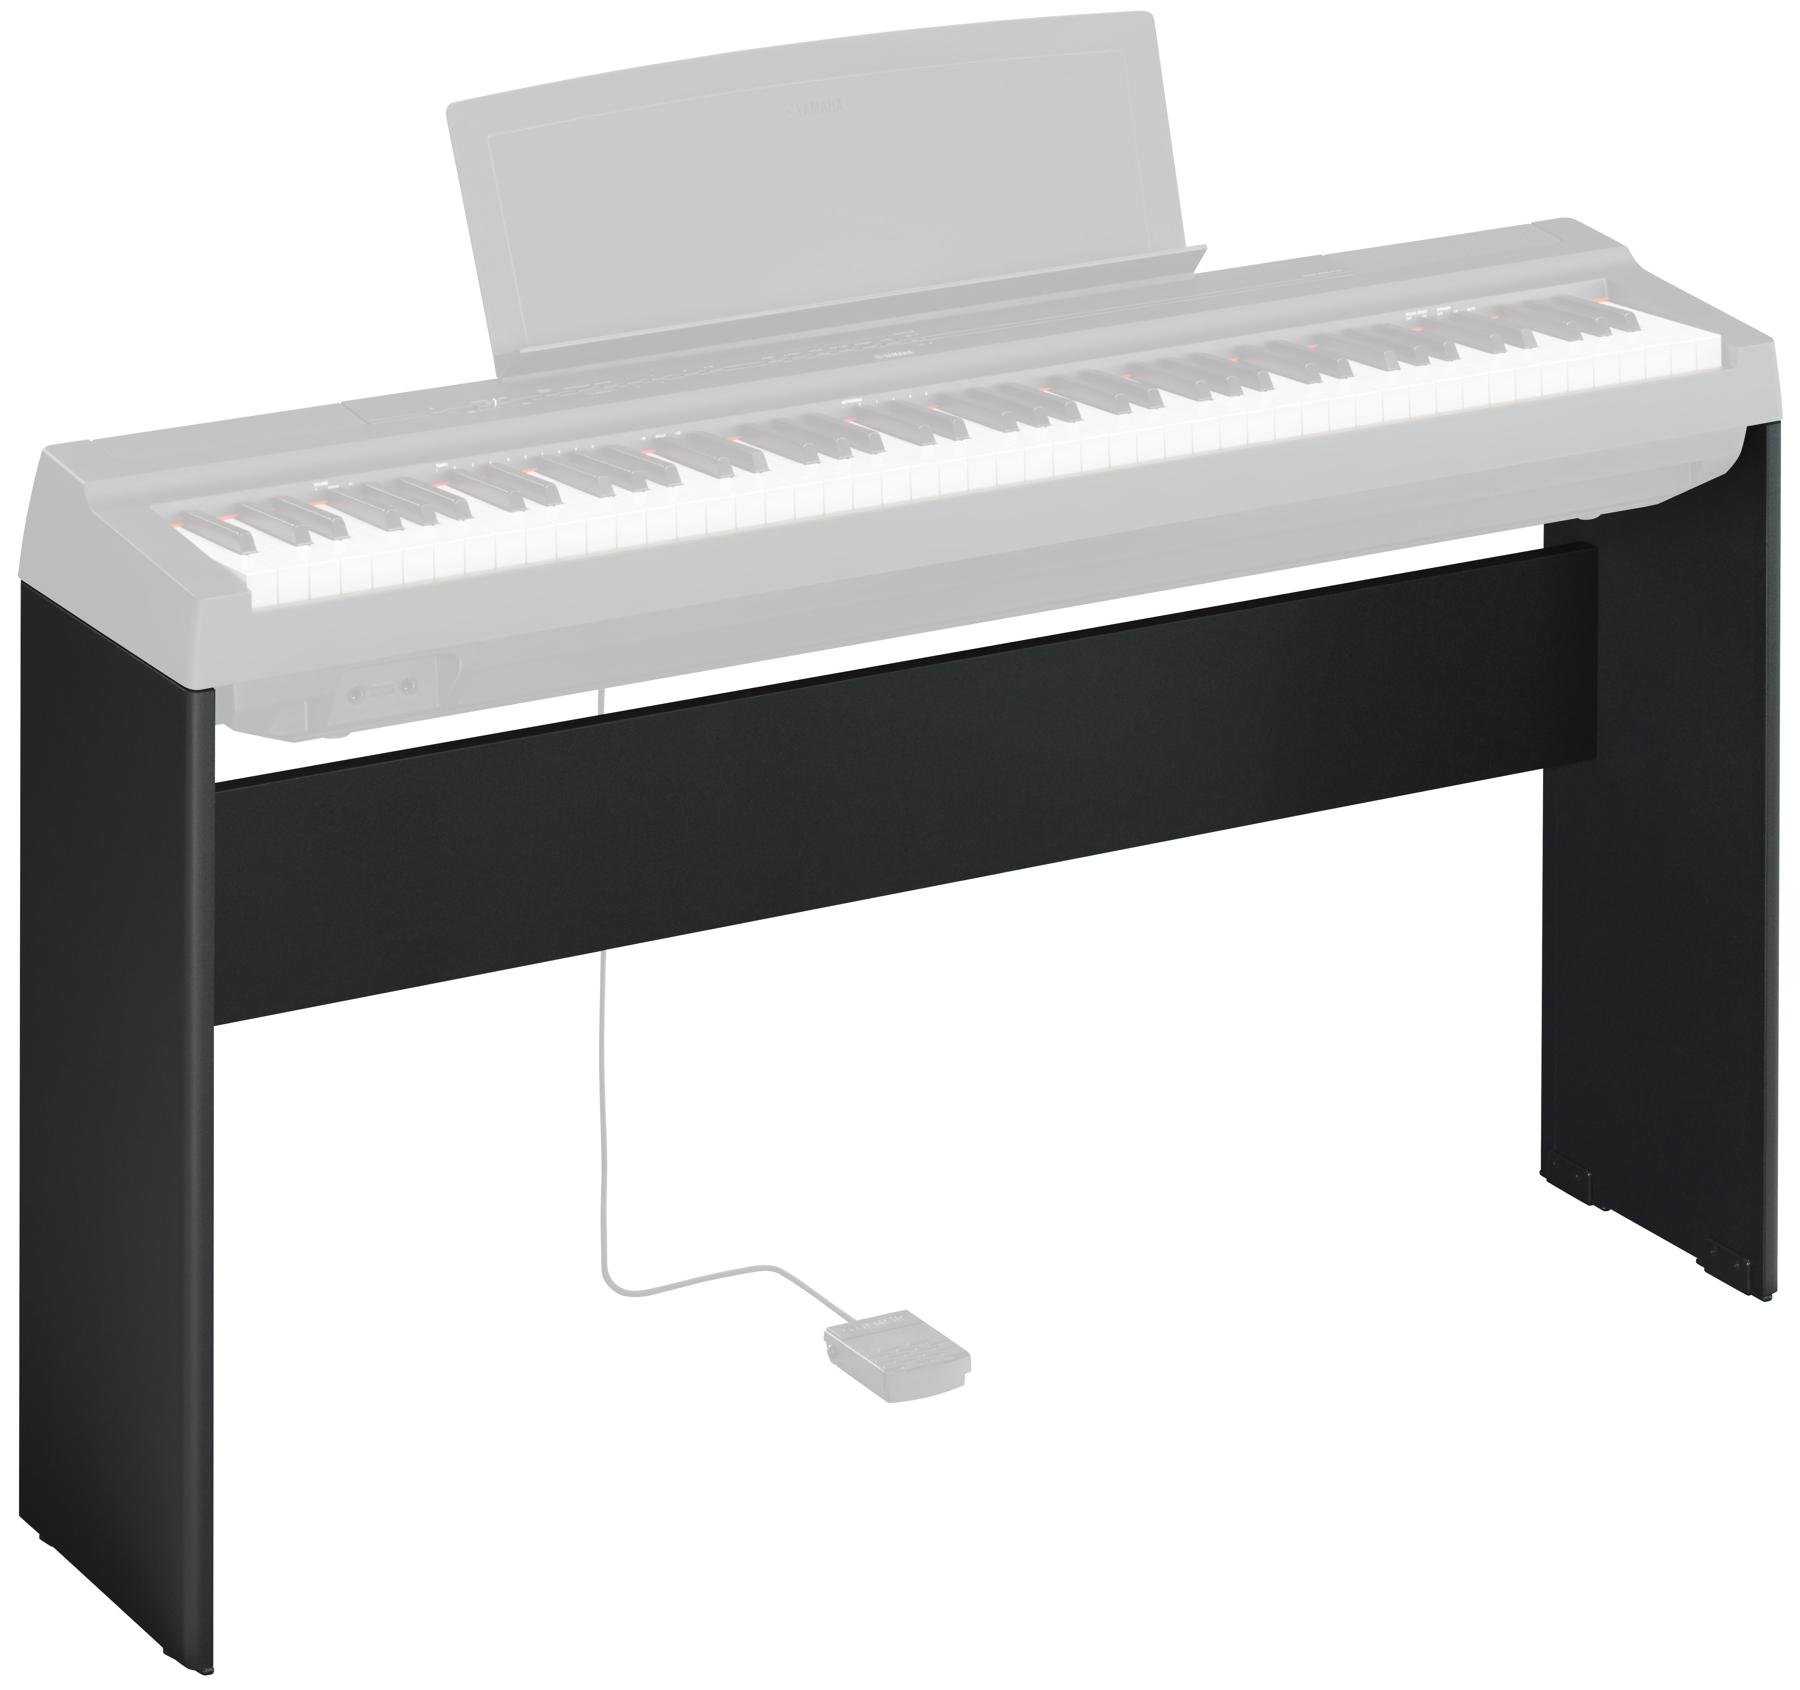 Yamaha L125 Stand For P 125 Digital Piano Black Sweetwater